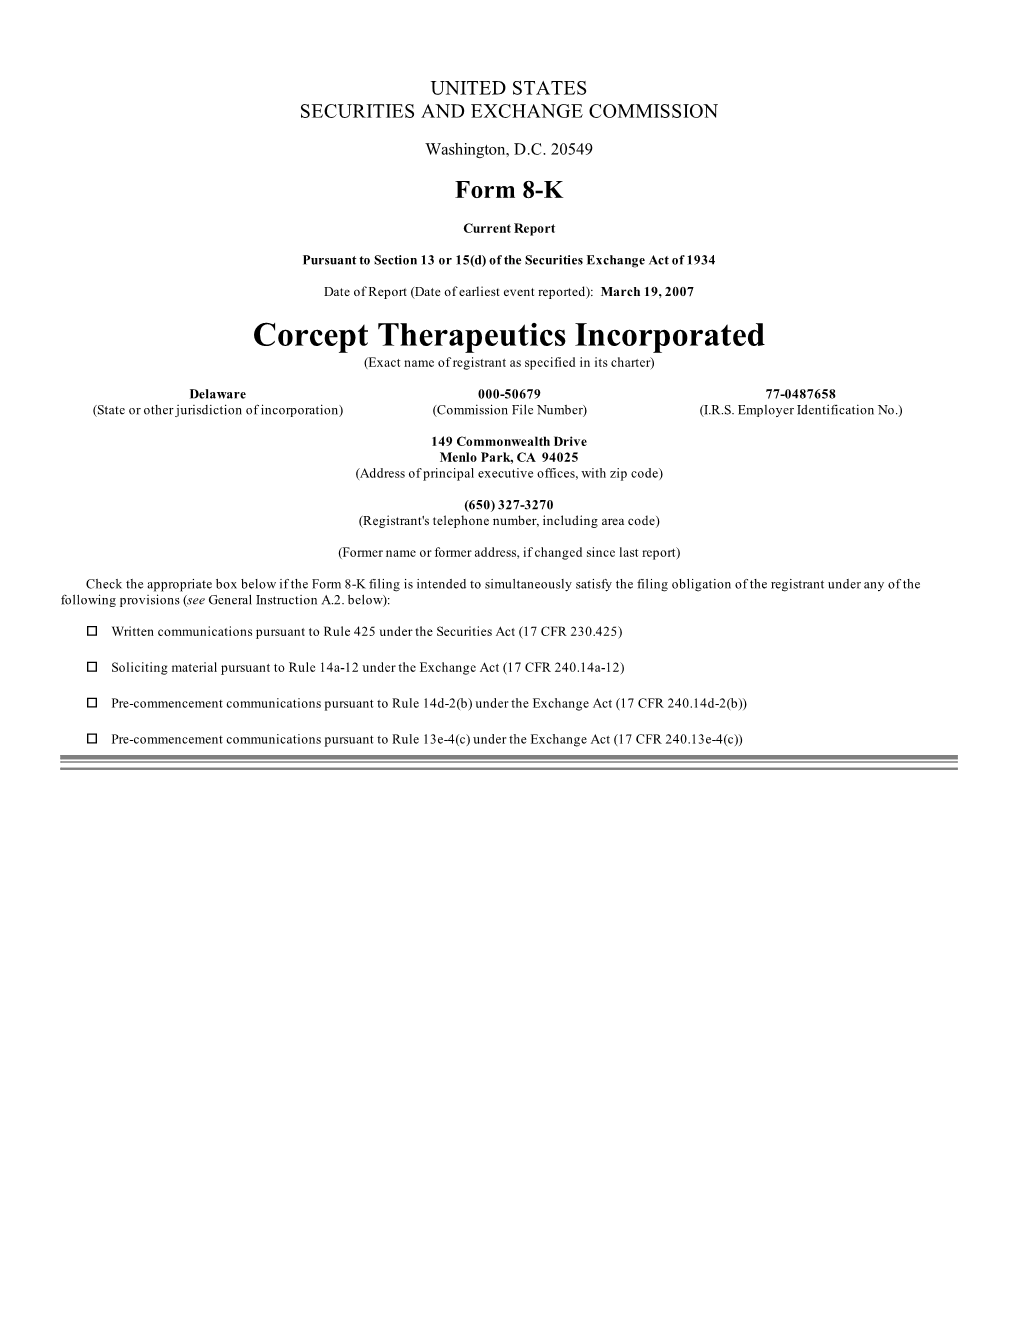 Corcept Therapeutics Incorporated (Exact Name of Registrant As Specified in Its Charter)